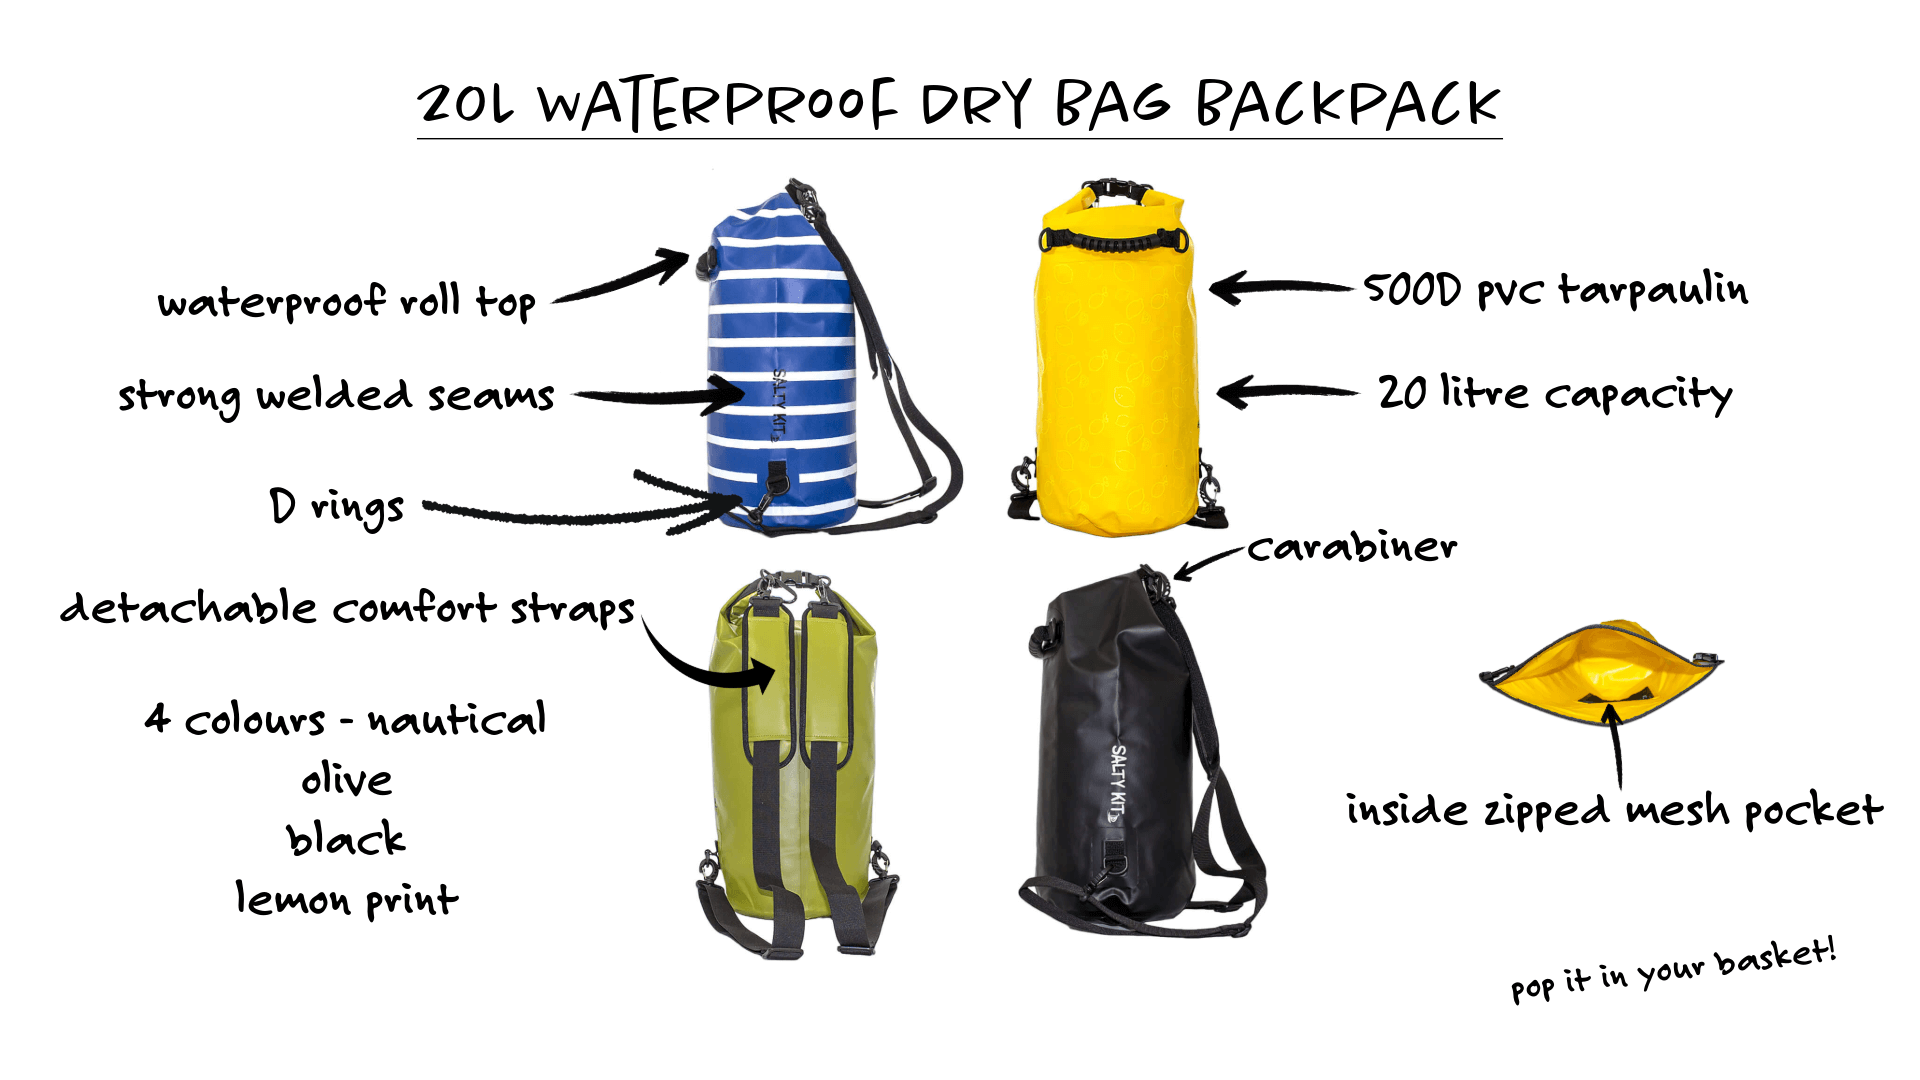 all of the USPs for the 20 litre waterproof backpack such as - waterproof roll top, strong welded seams, D rings, in 4 colours black, olive, nautical blue & white stripe and yellow with lemon print, 500D pvc tarpaulin, 20 litre capacity, detachable comfort straps, inside zipped mesh pocket,  so pop it in your basket!